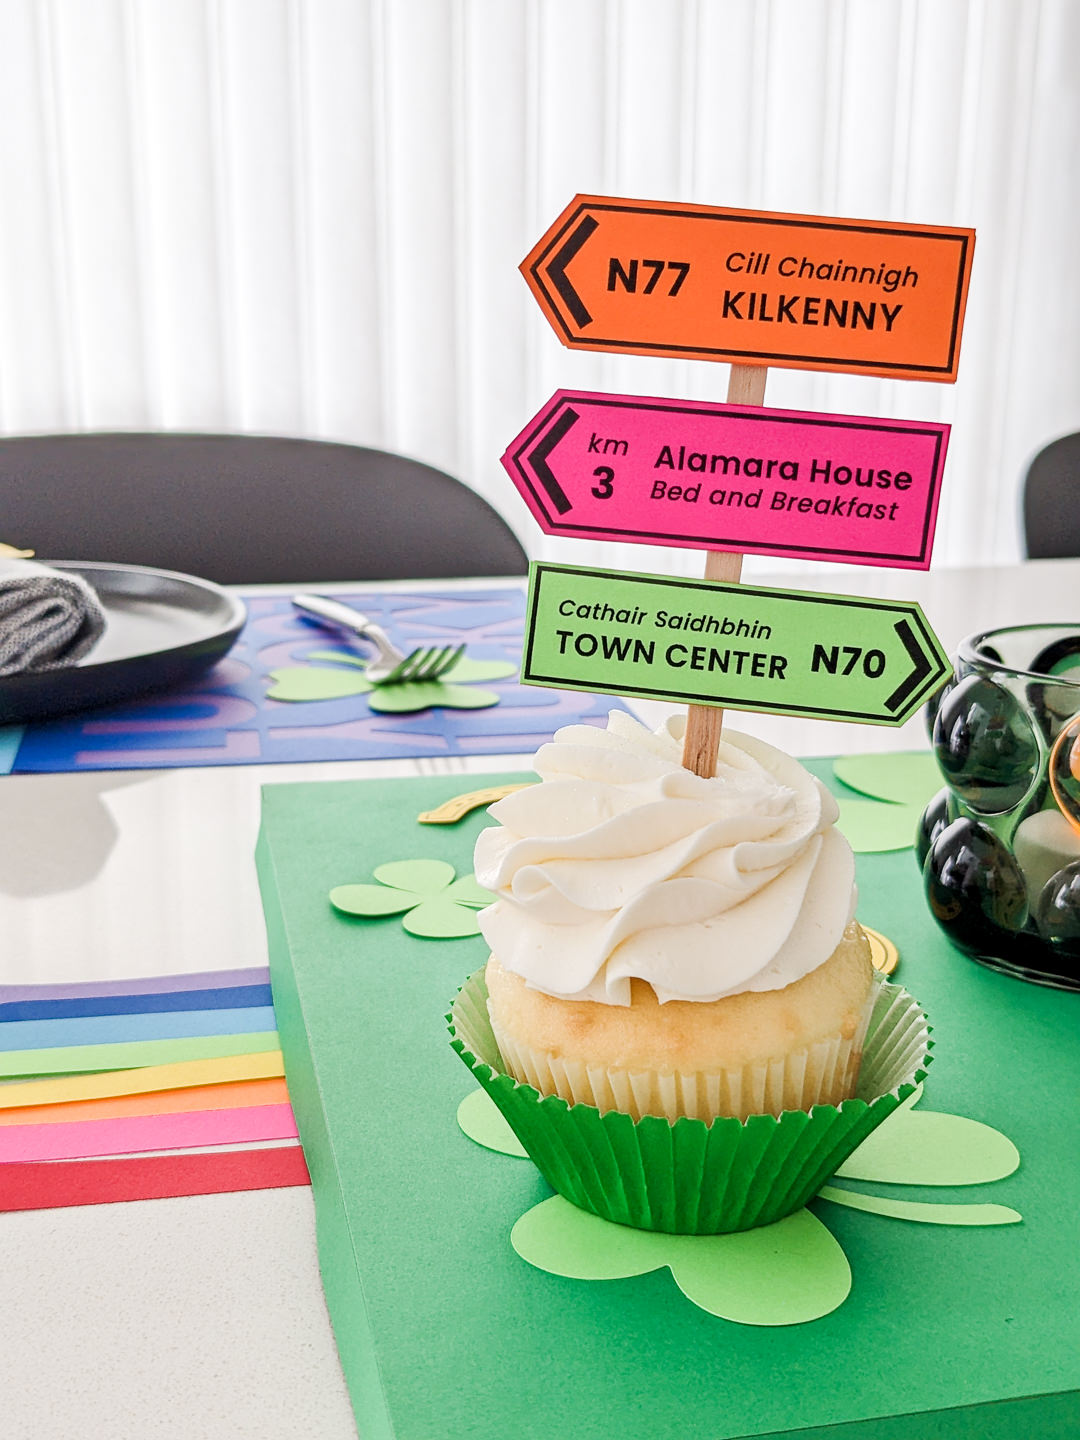 Cupcake with Irish road signs cupcake topper sitting on a shamrock-decorated table for St. Patrick's Day